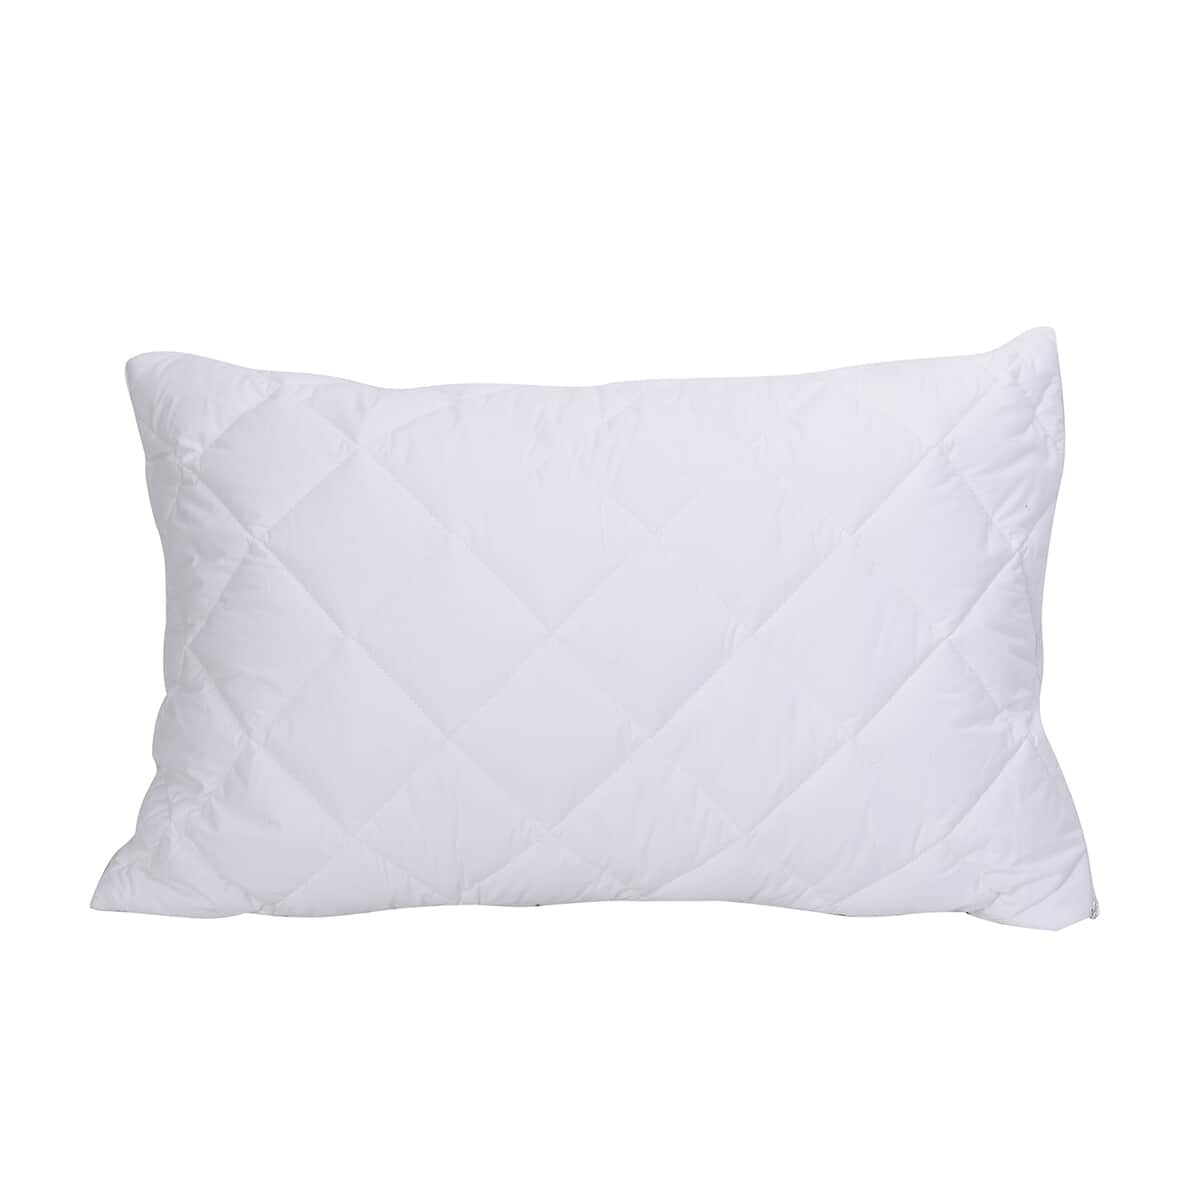 HOMESMART White Microfiber Quilted Magnet Pillow with Removable Cotton Cover - Full (Standard) image number 0